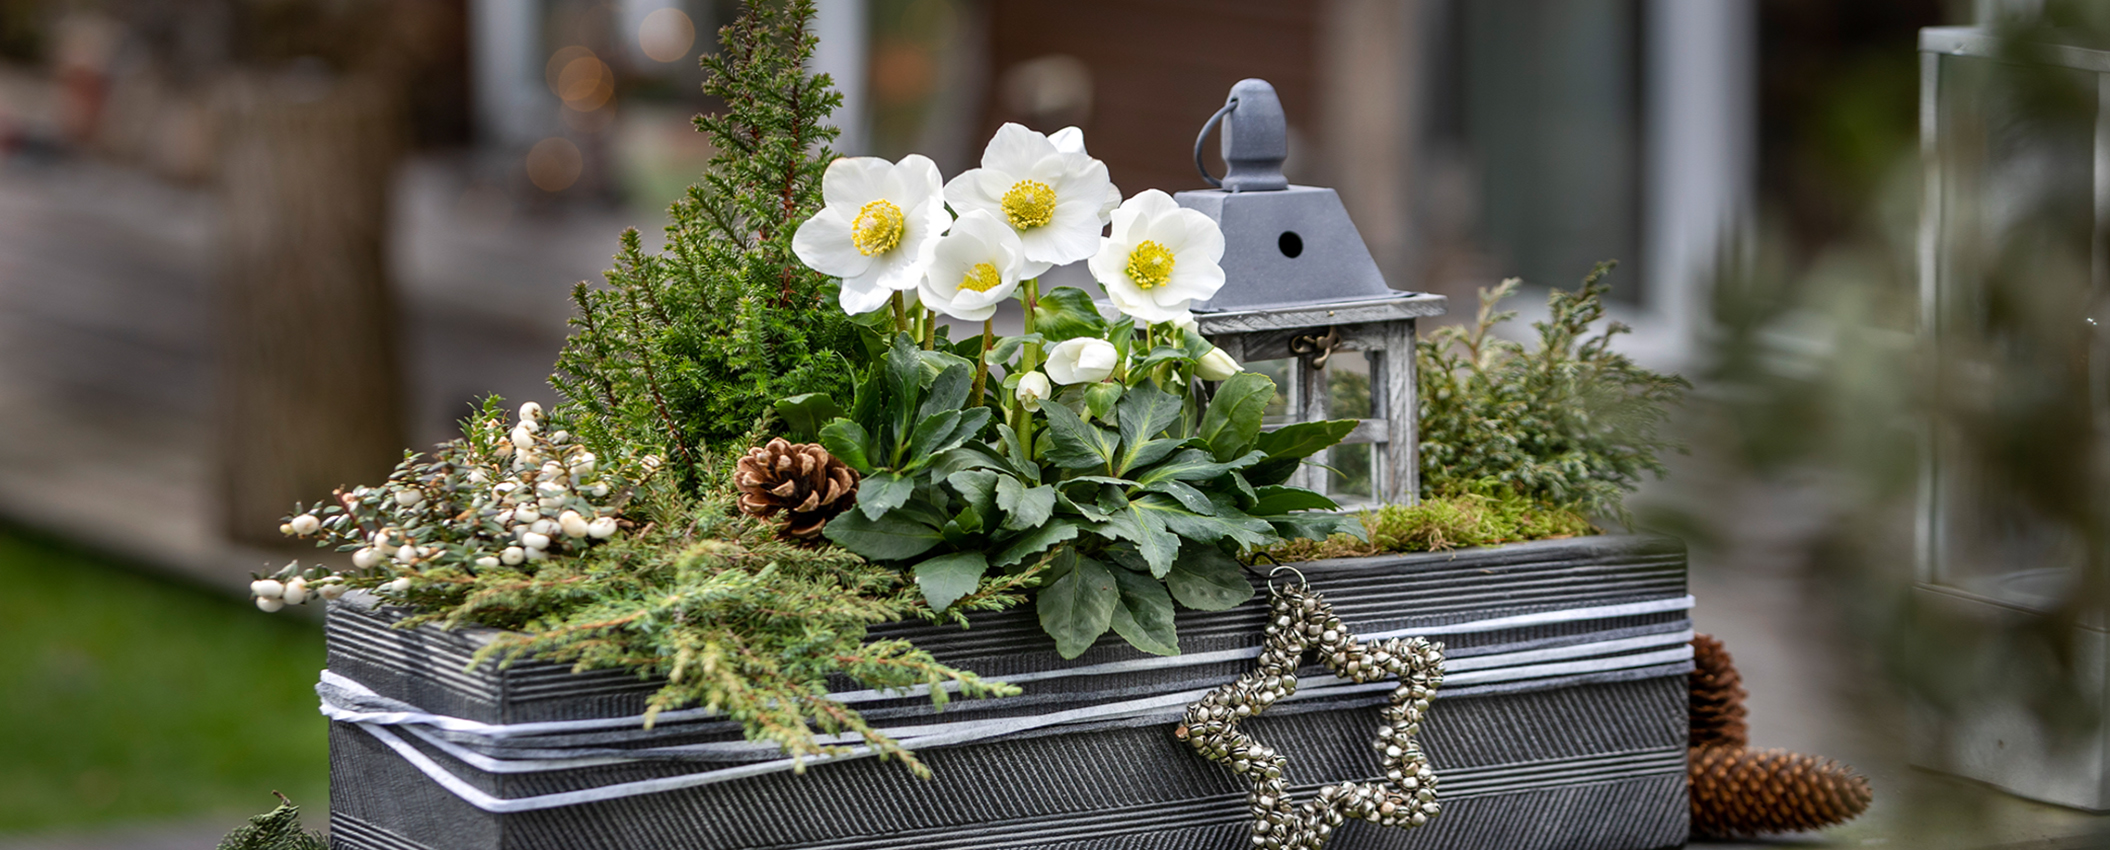 Balcony box with Christmas rose, conifers and lantern.